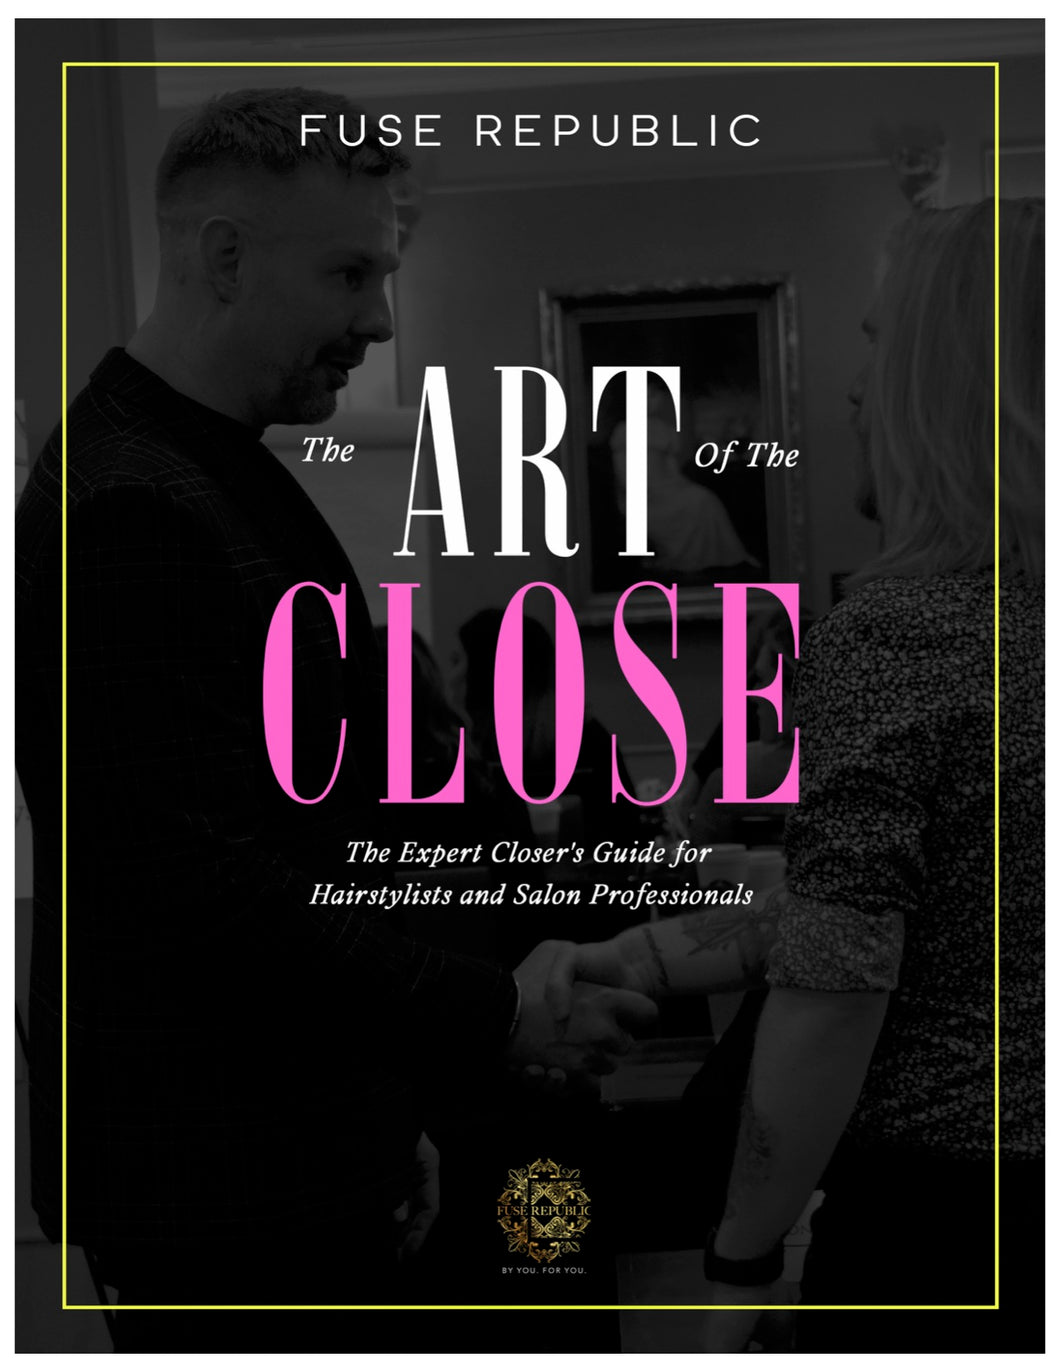 The Art of the Close Manual - The Expert Closer's Guide for Hairstylists and Salon Professionals (E-book)